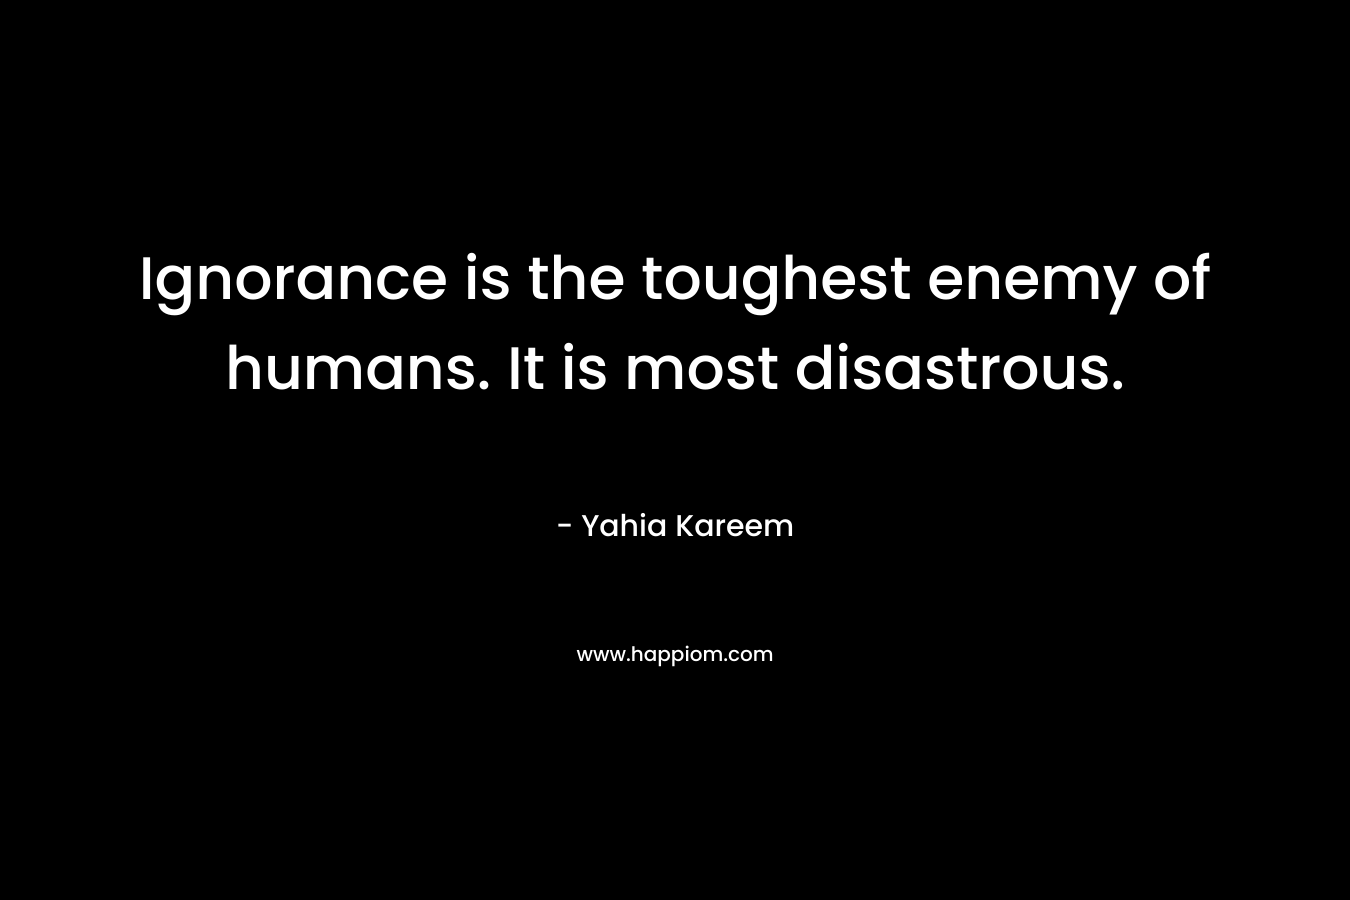 Ignorance is the toughest enemy of humans. It is most disastrous.